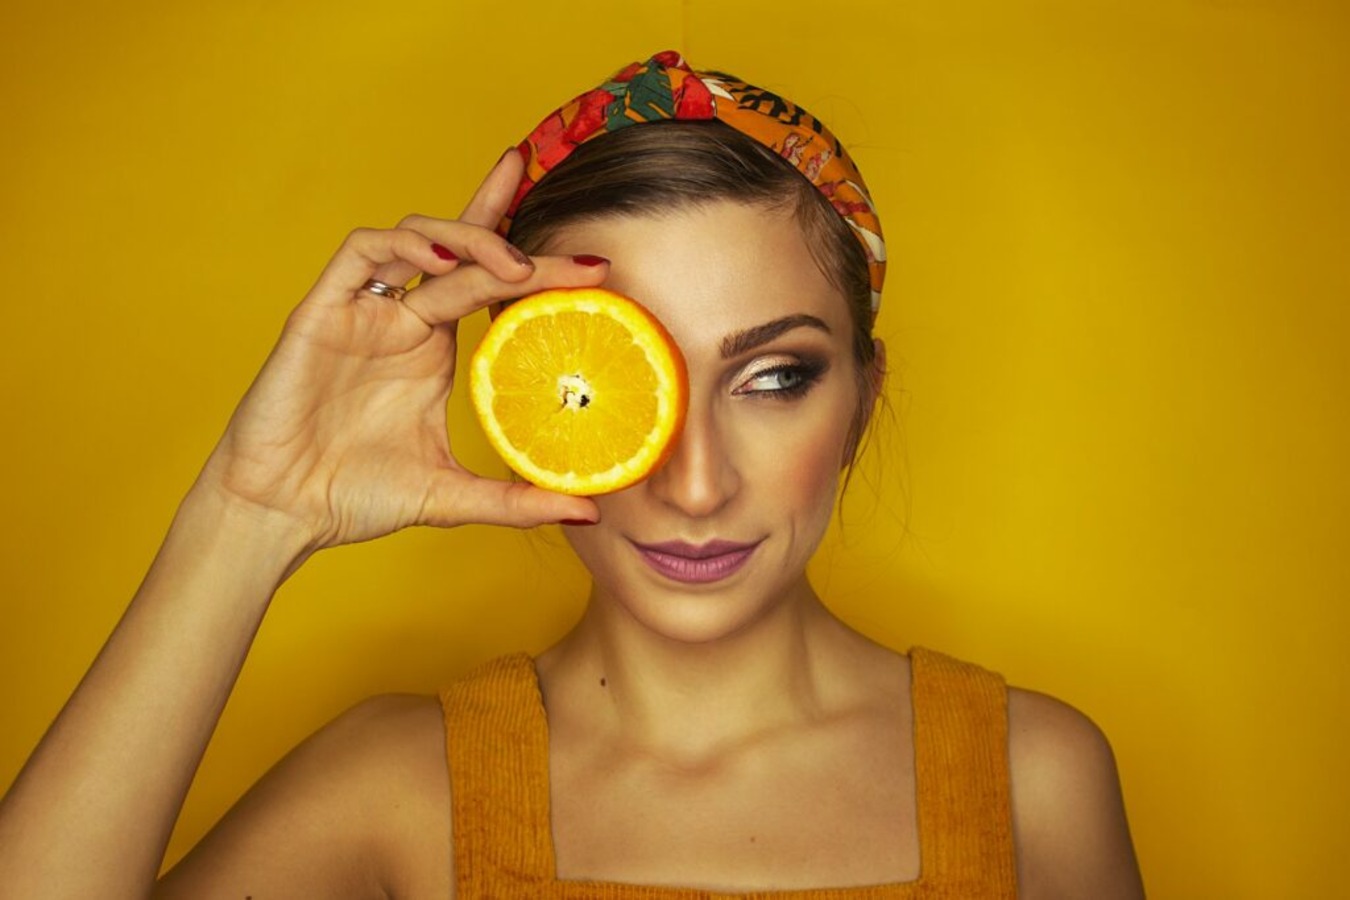 New Research Suggests Social Media Influencers Could Be Key To Increase Produce Consumption